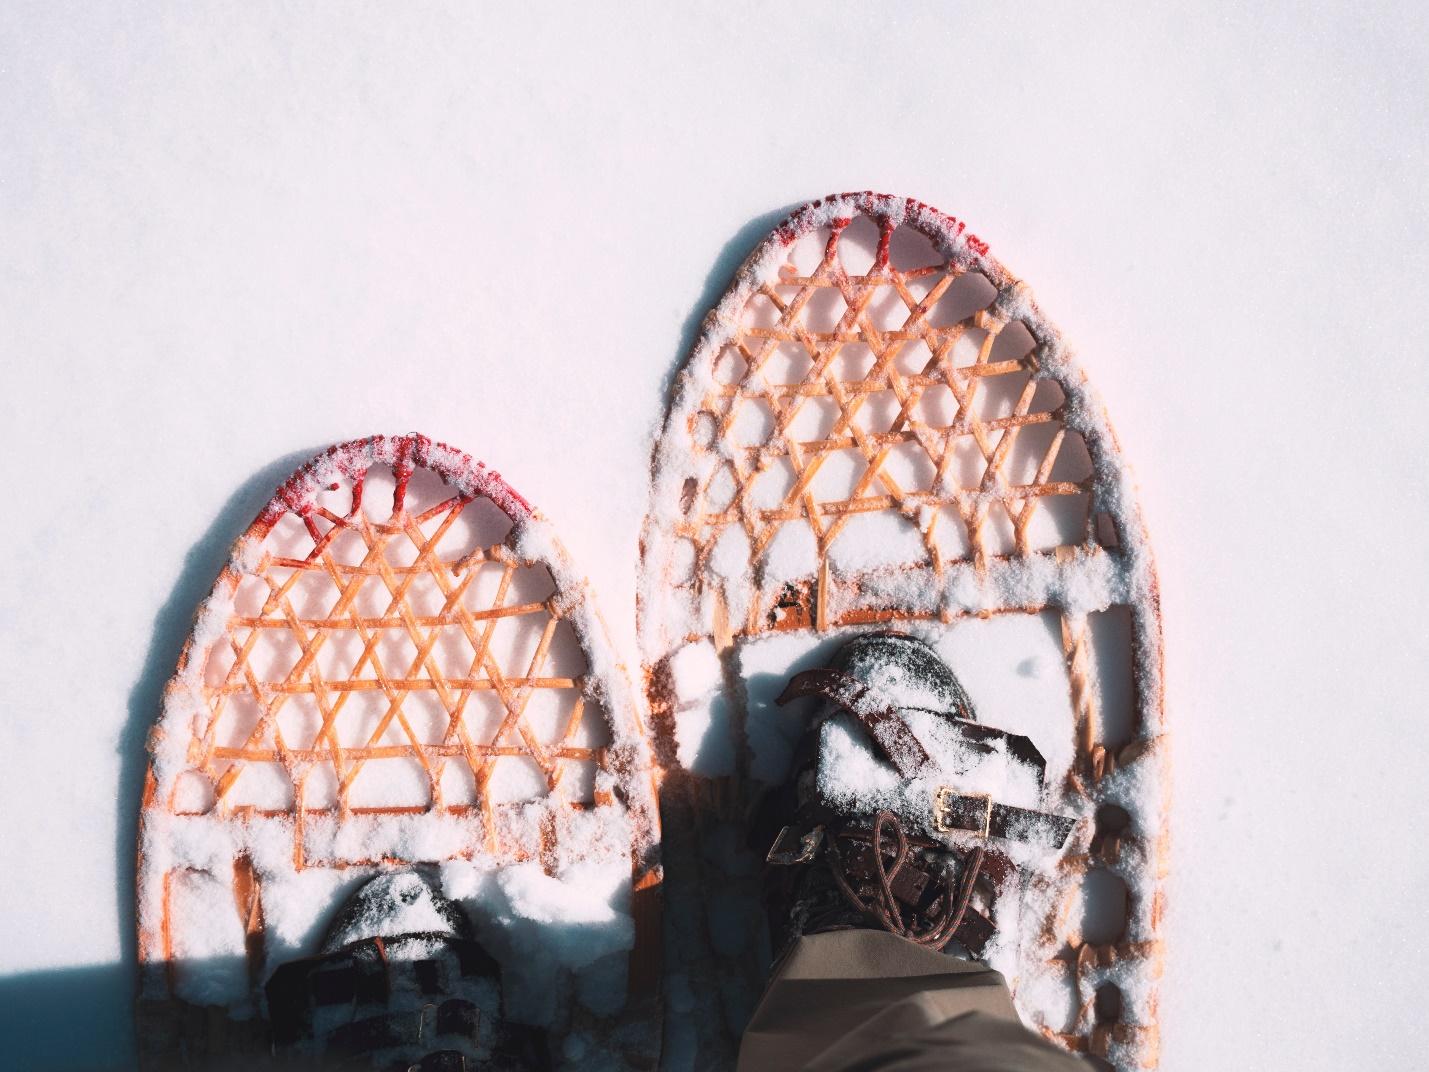 traditional snowshoes with feet in them on snow